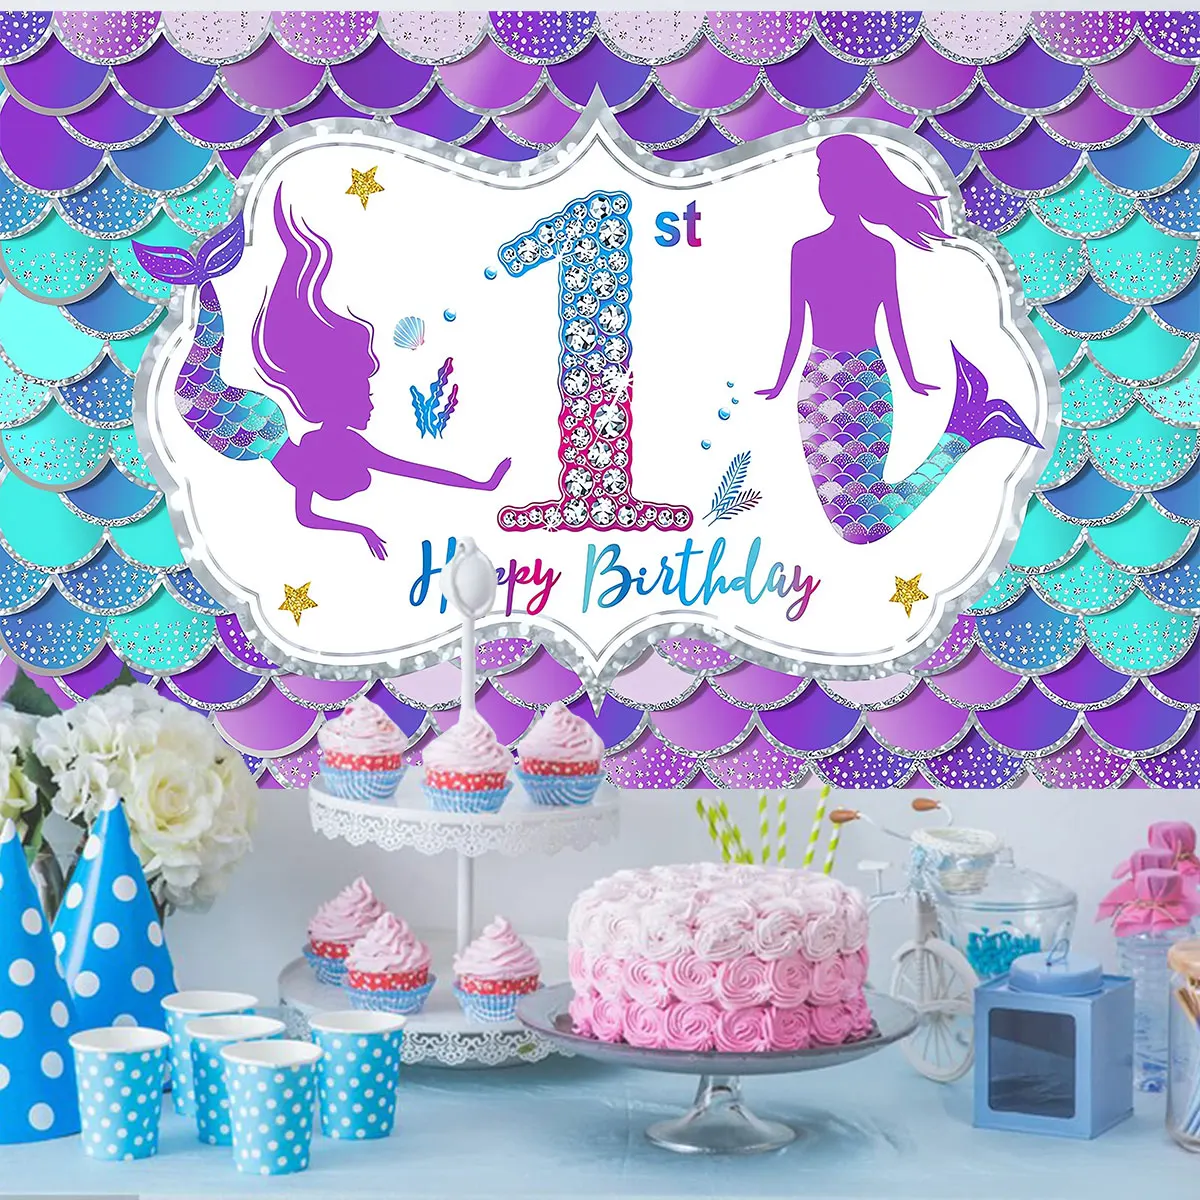 Little Mermaid Fish Scale Tail Background Mermaid Birthday Party